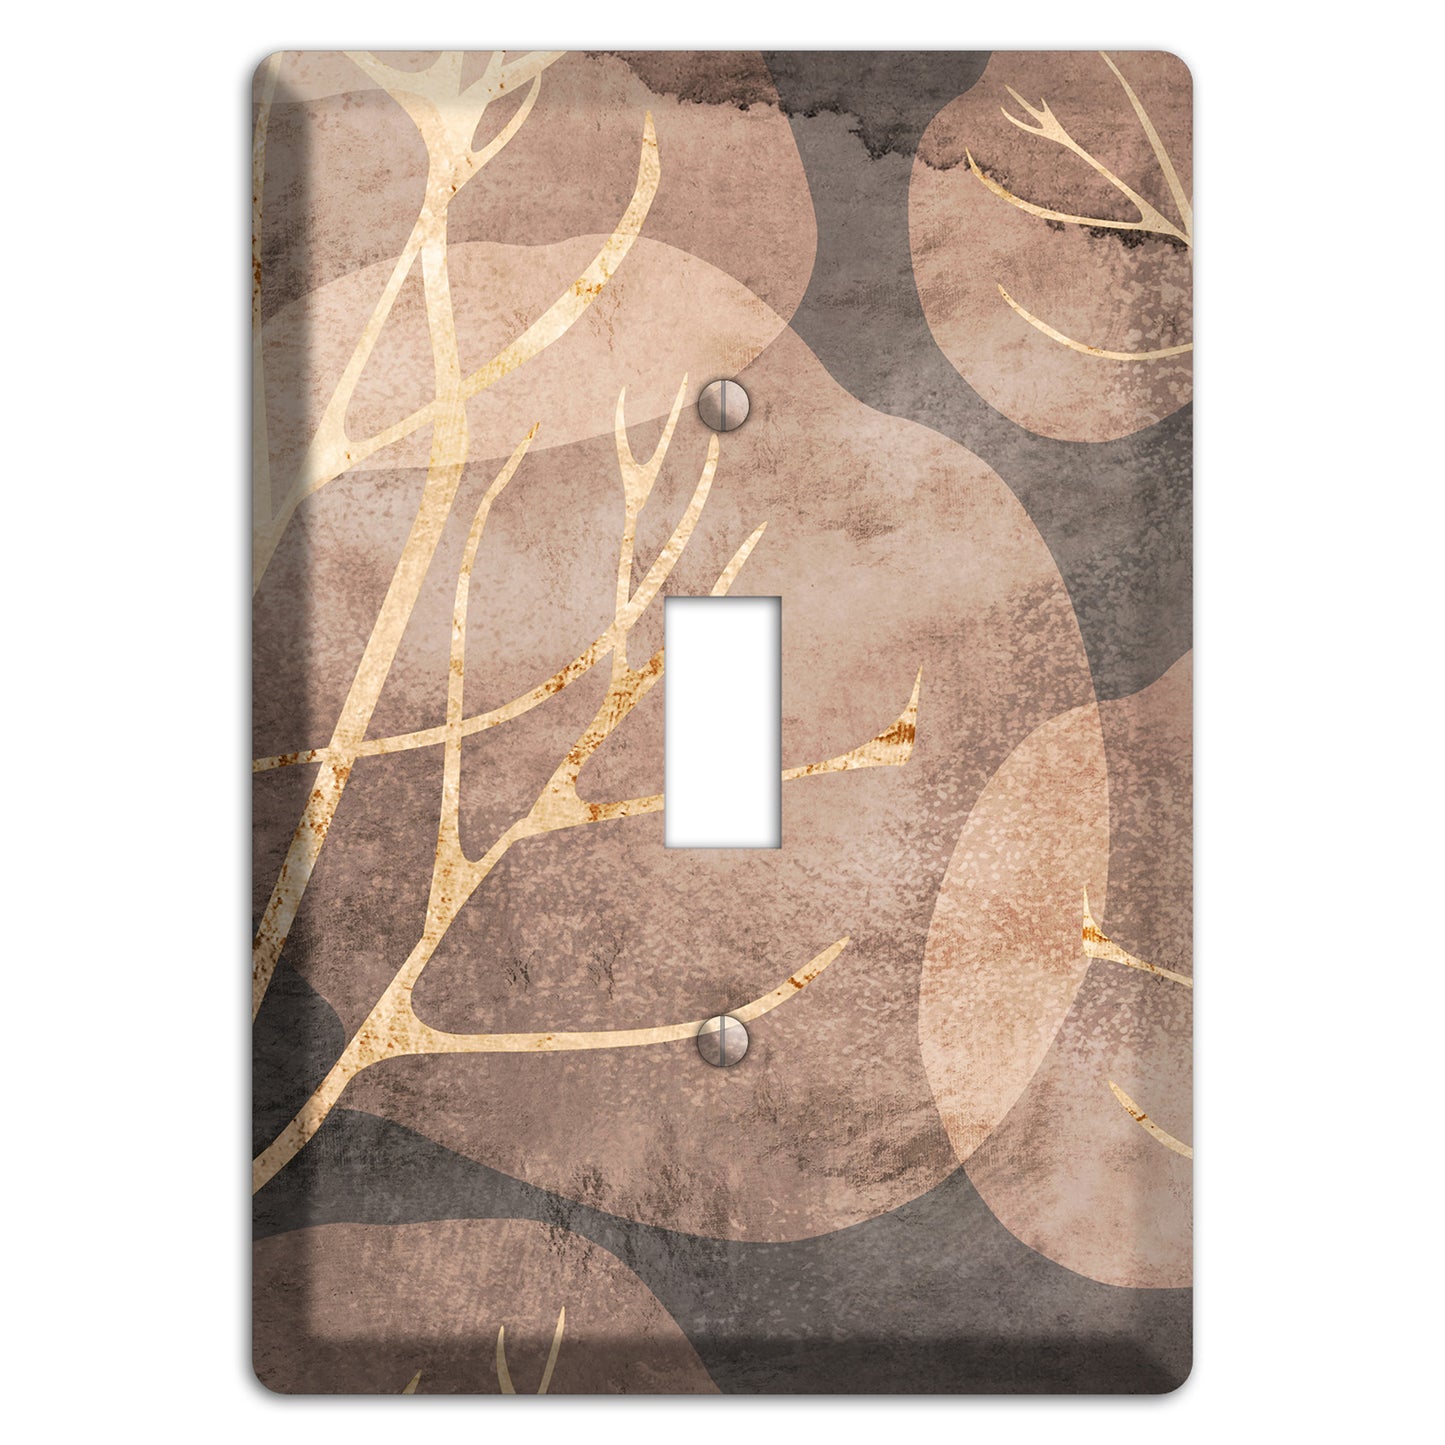 Autumn Leaves Cover Plates